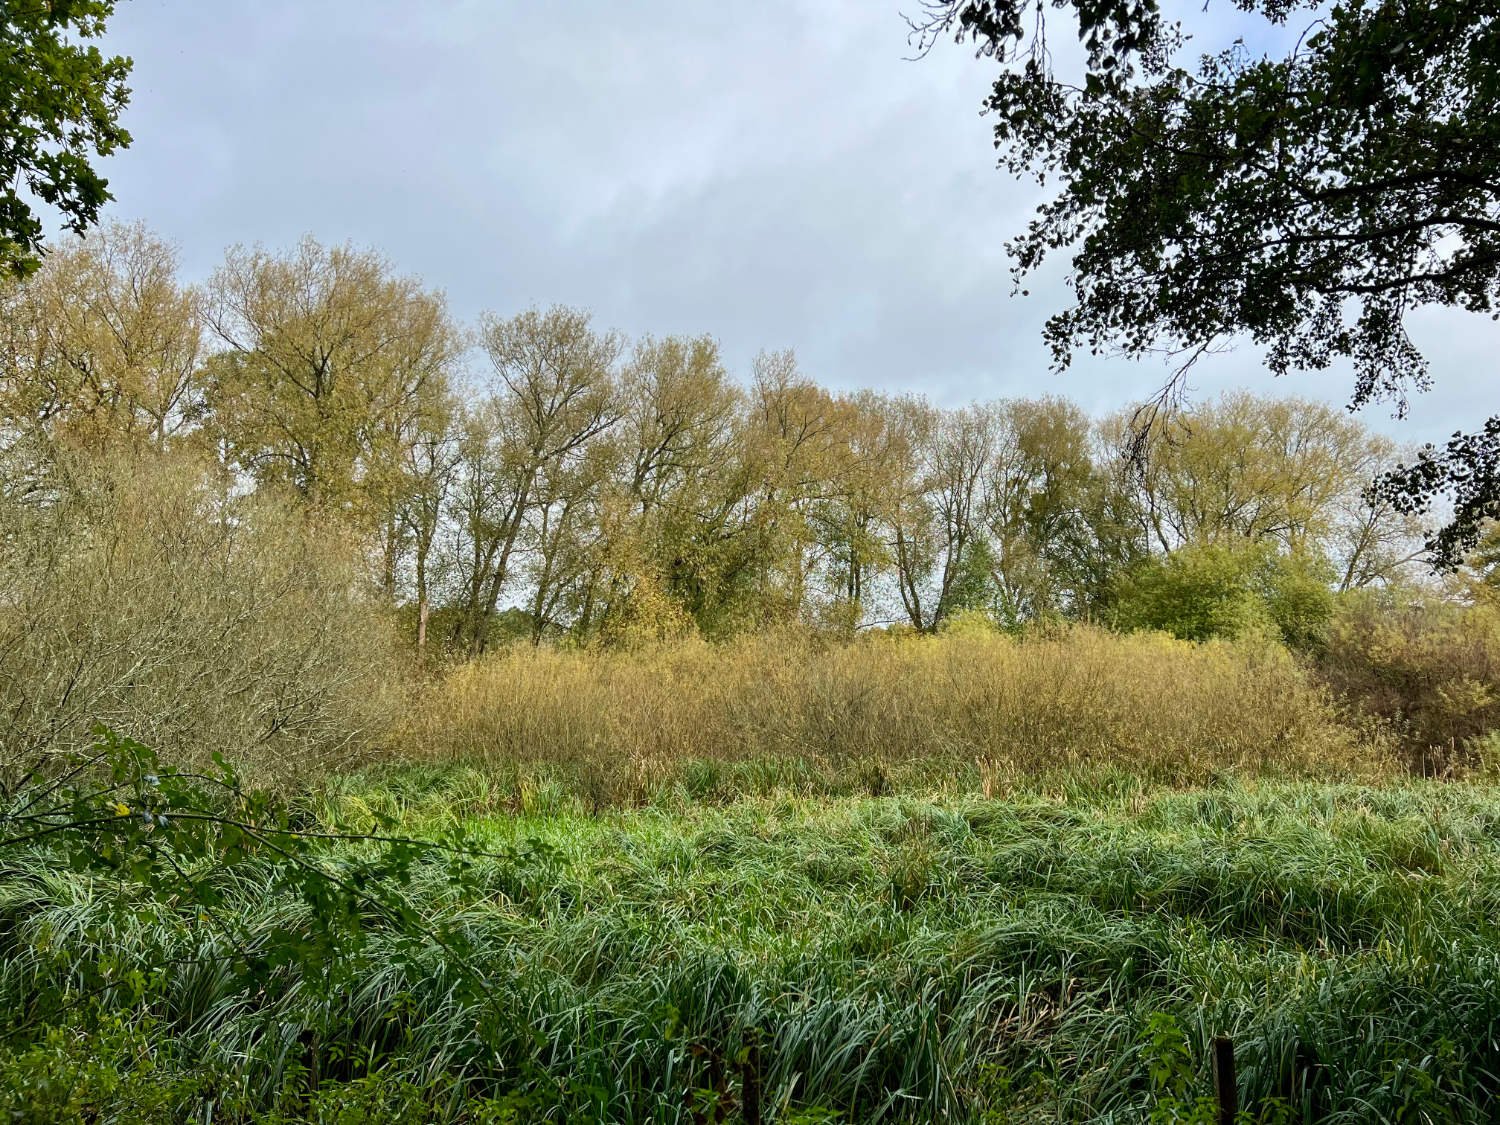 Rickmansworth; willows and reeds